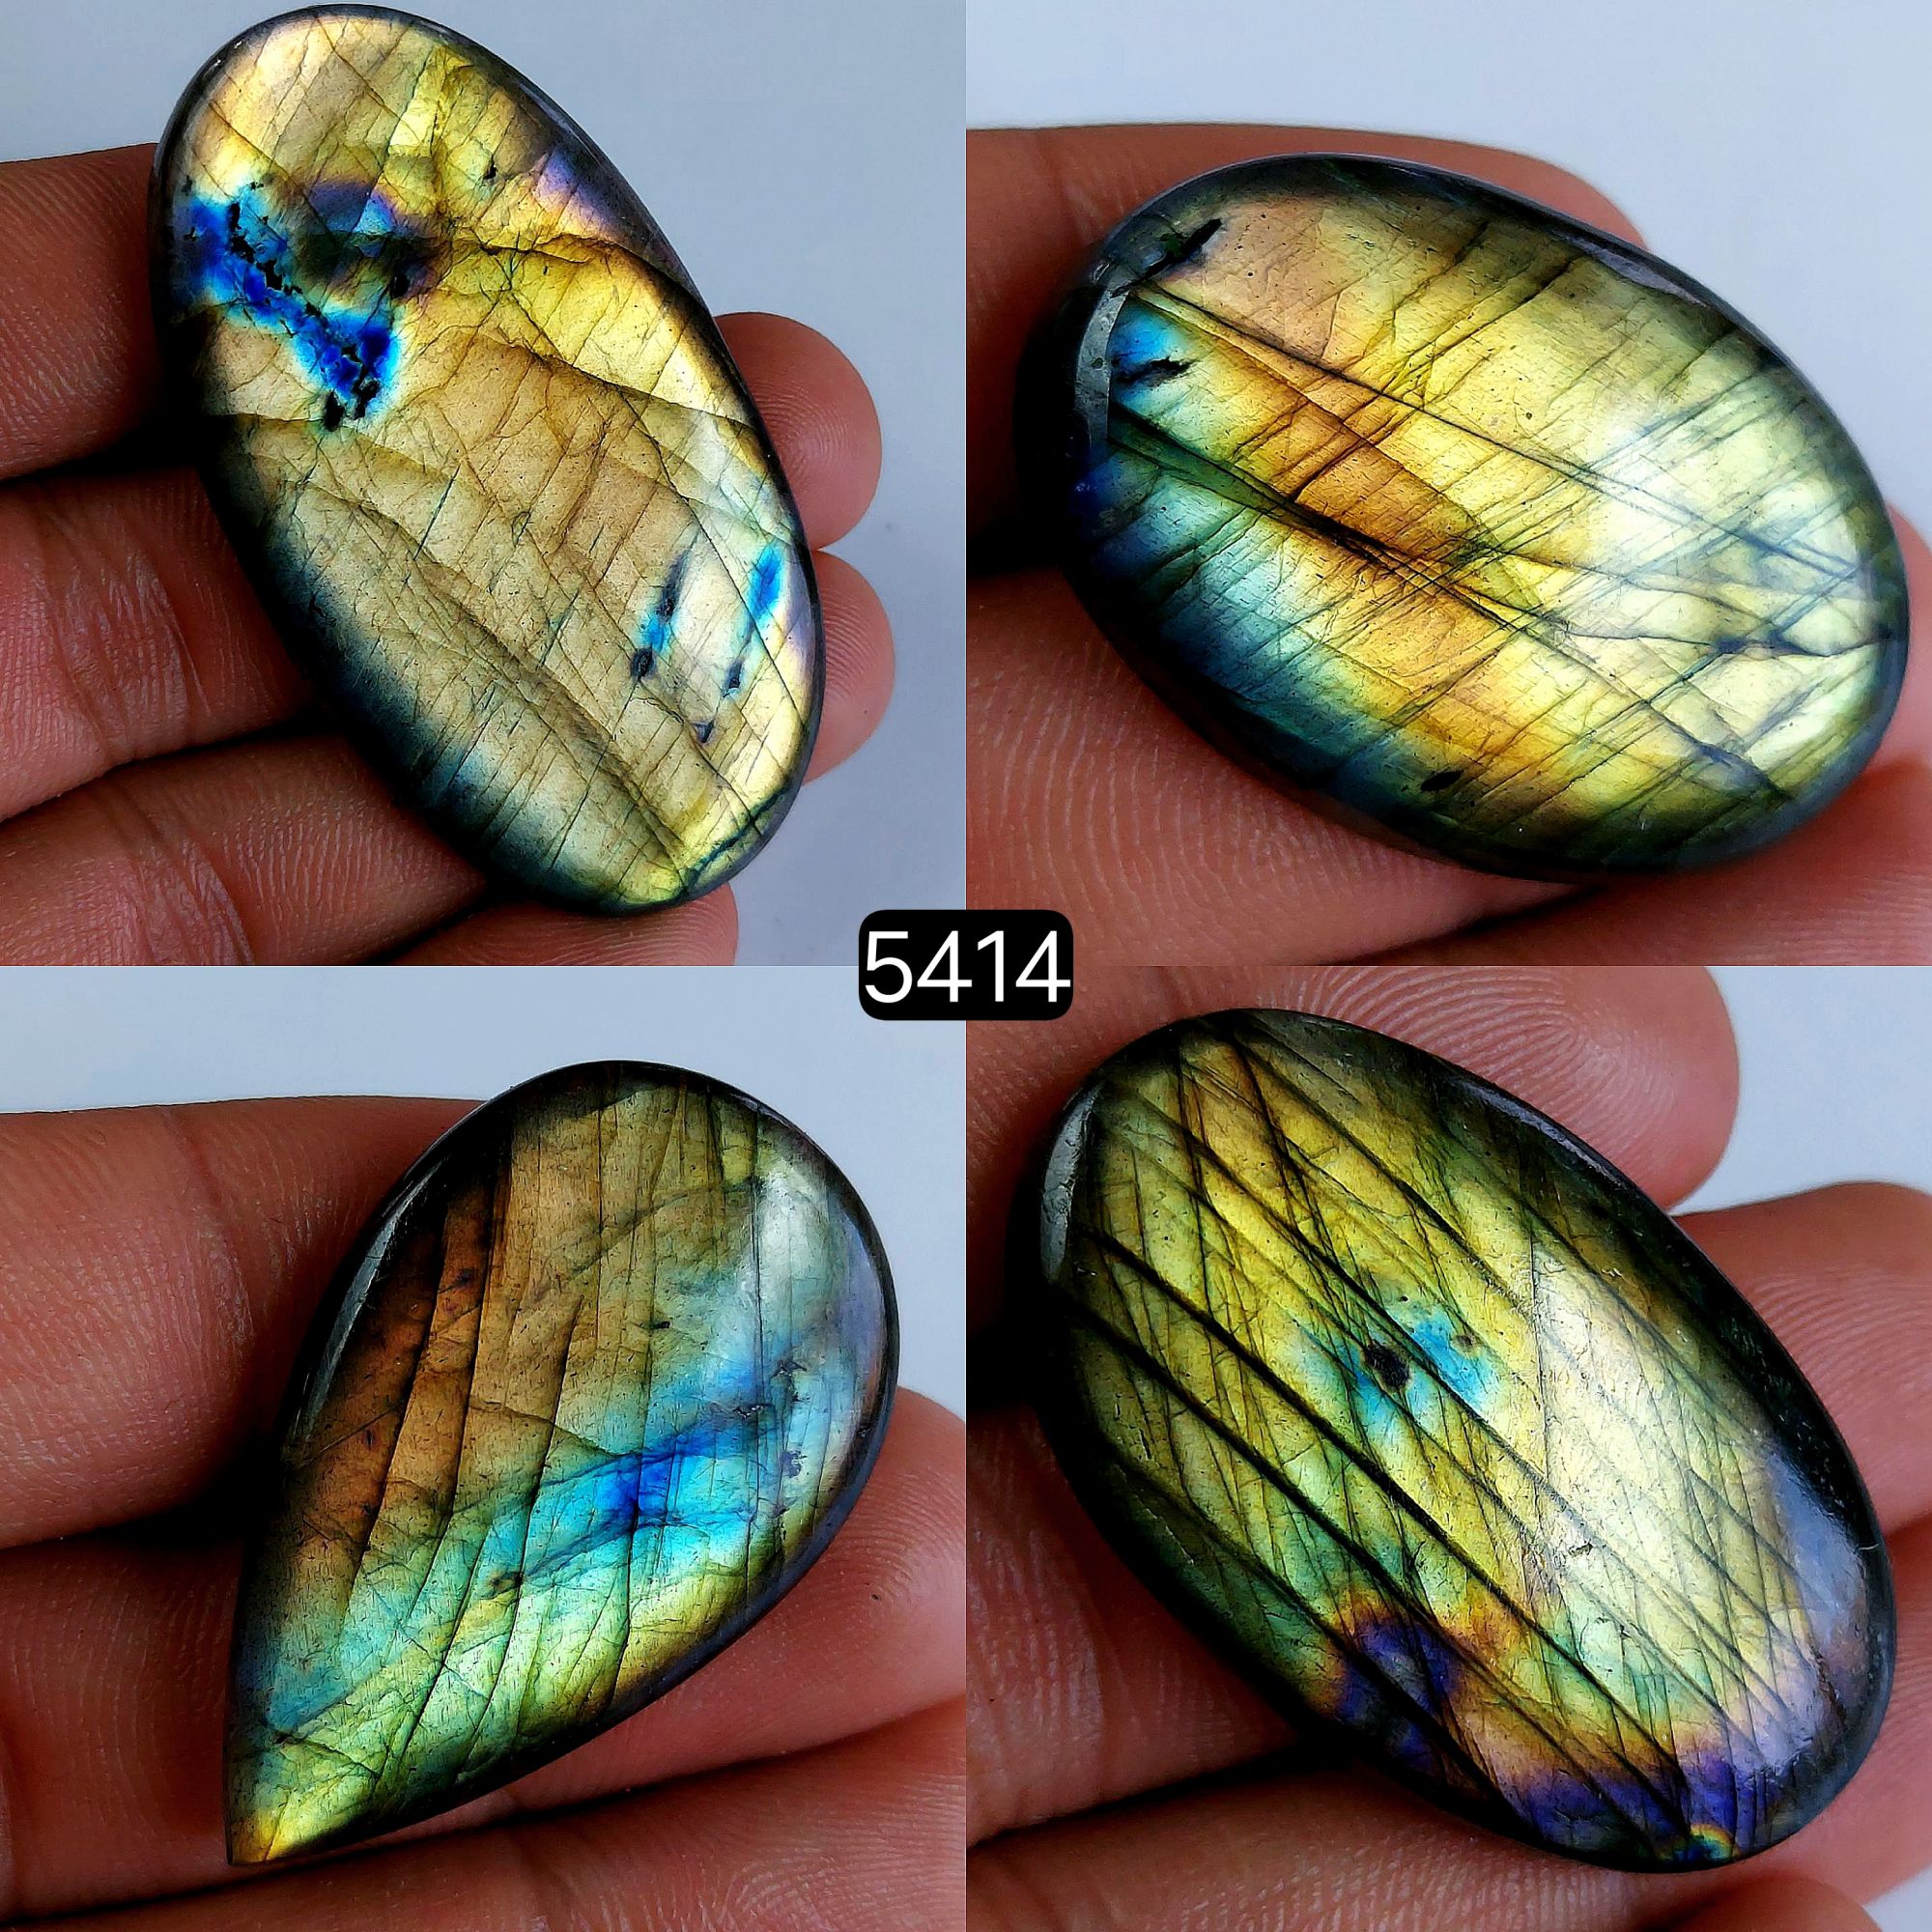 4 Pcs Lot 283Cts Natural Labradorite Oval Shape Cabochon Loose Gemstone For Jewelry Making Crystal Cabochon Semi-Precious Labradorite Gemstone 57x30-34x23mm